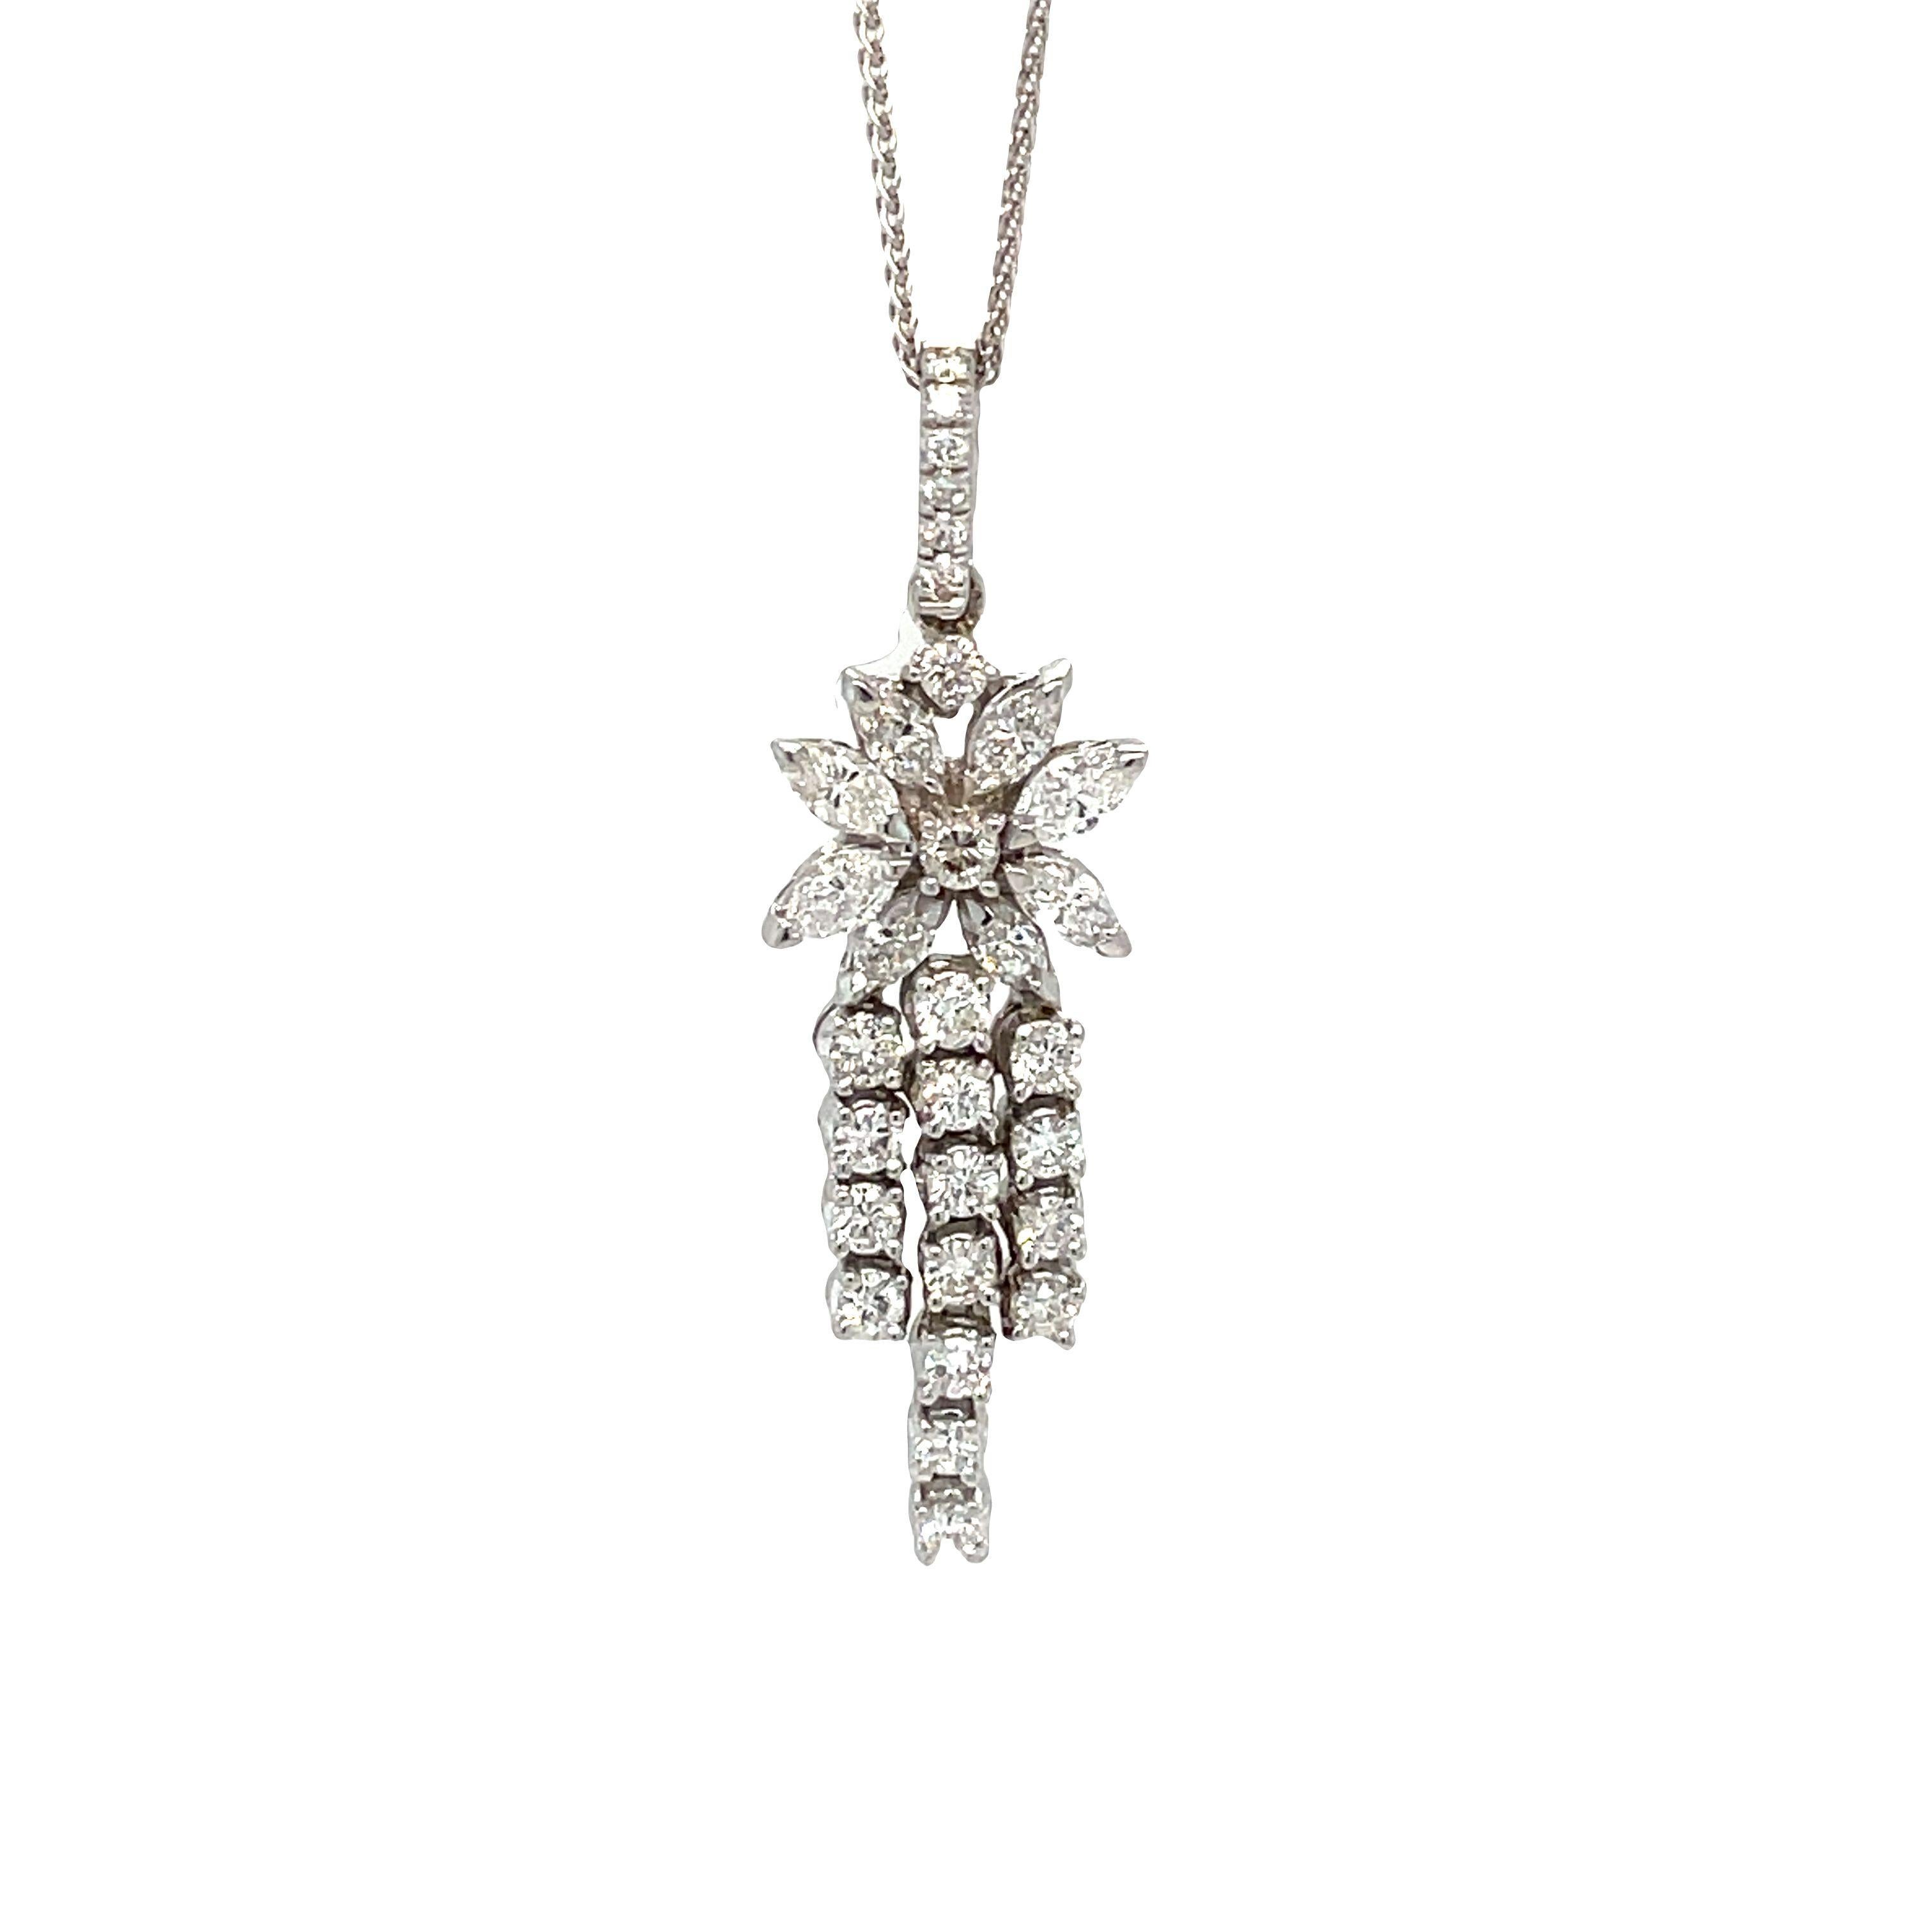 Diamond Flower Cluster Drop Pendant Necklace in 14k White Gold In Excellent Condition For Sale In beverly hills, CA